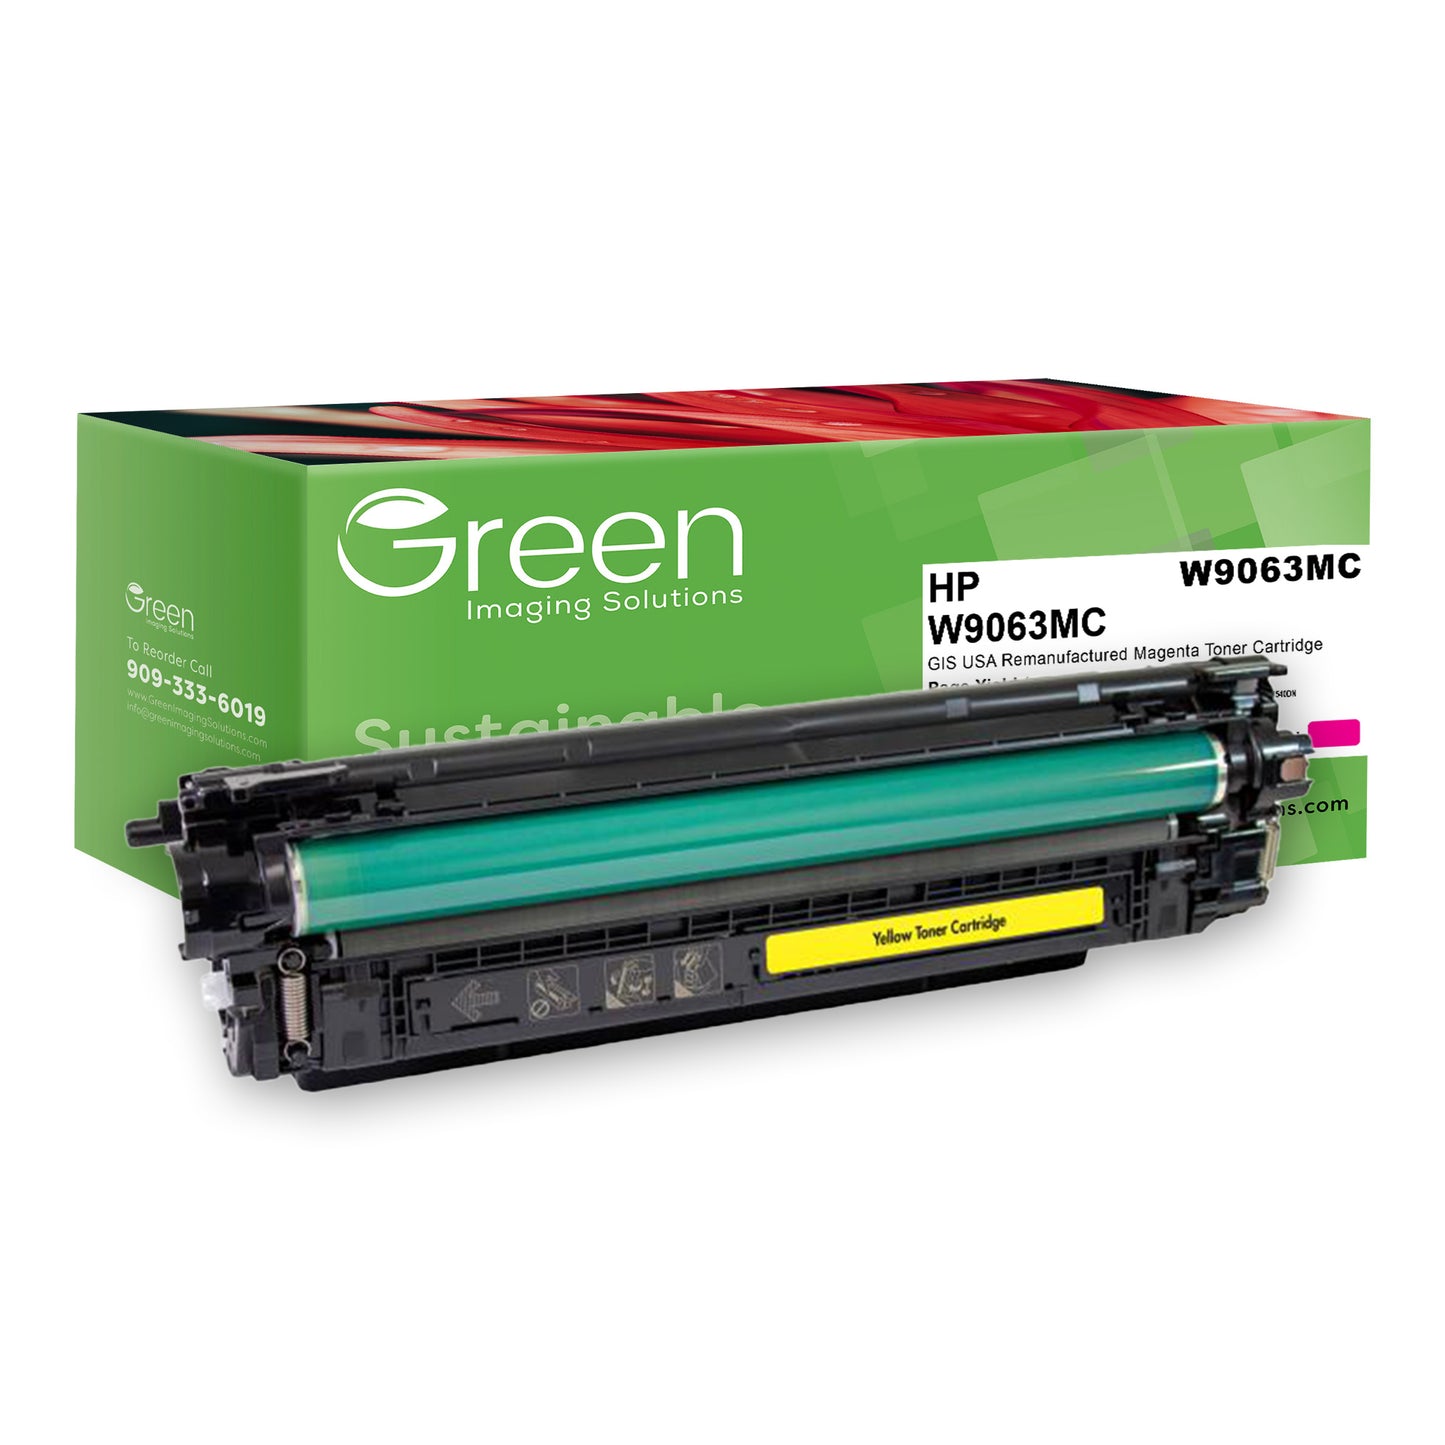 Green Imaging Solutions USA Remanufactured Magenta Toner Cartridge for HP W9063MC